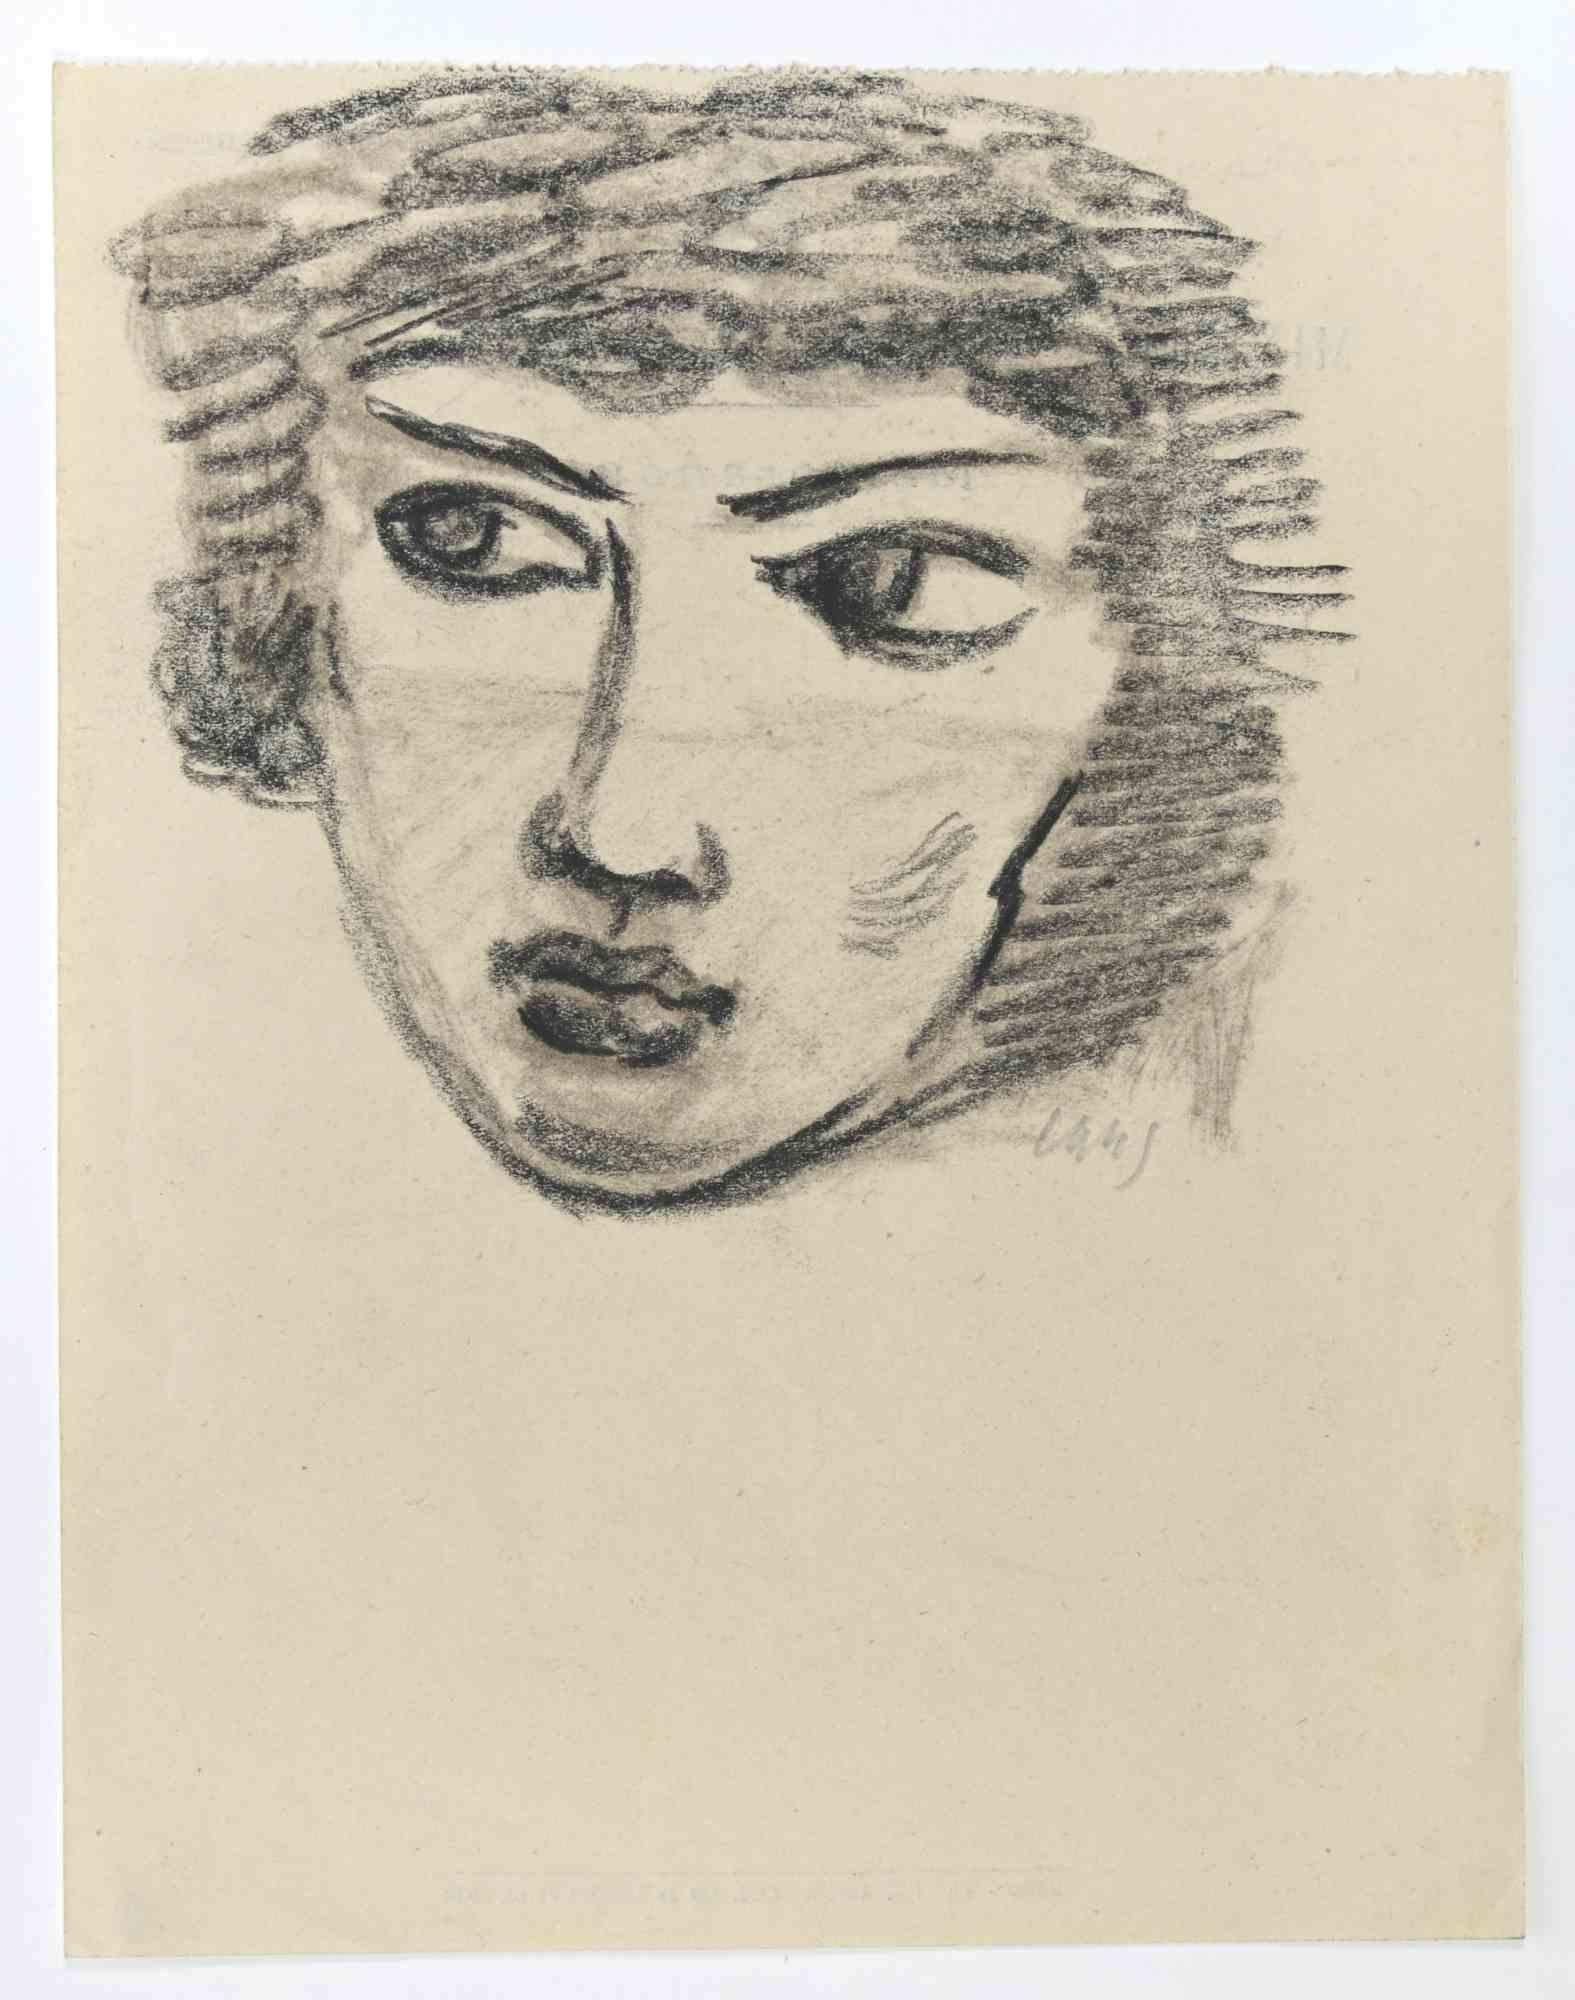 The Portrait is a Pencil Drawing realized by Mino Maccari  (1924-1989) in 1945.

Monogrammed in the lower margin.

Good condition.

Mino Maccari (Siena, 1924-Rome, June 16, 1989) was an Italian writer, painter, engraver and journalist, winner of the